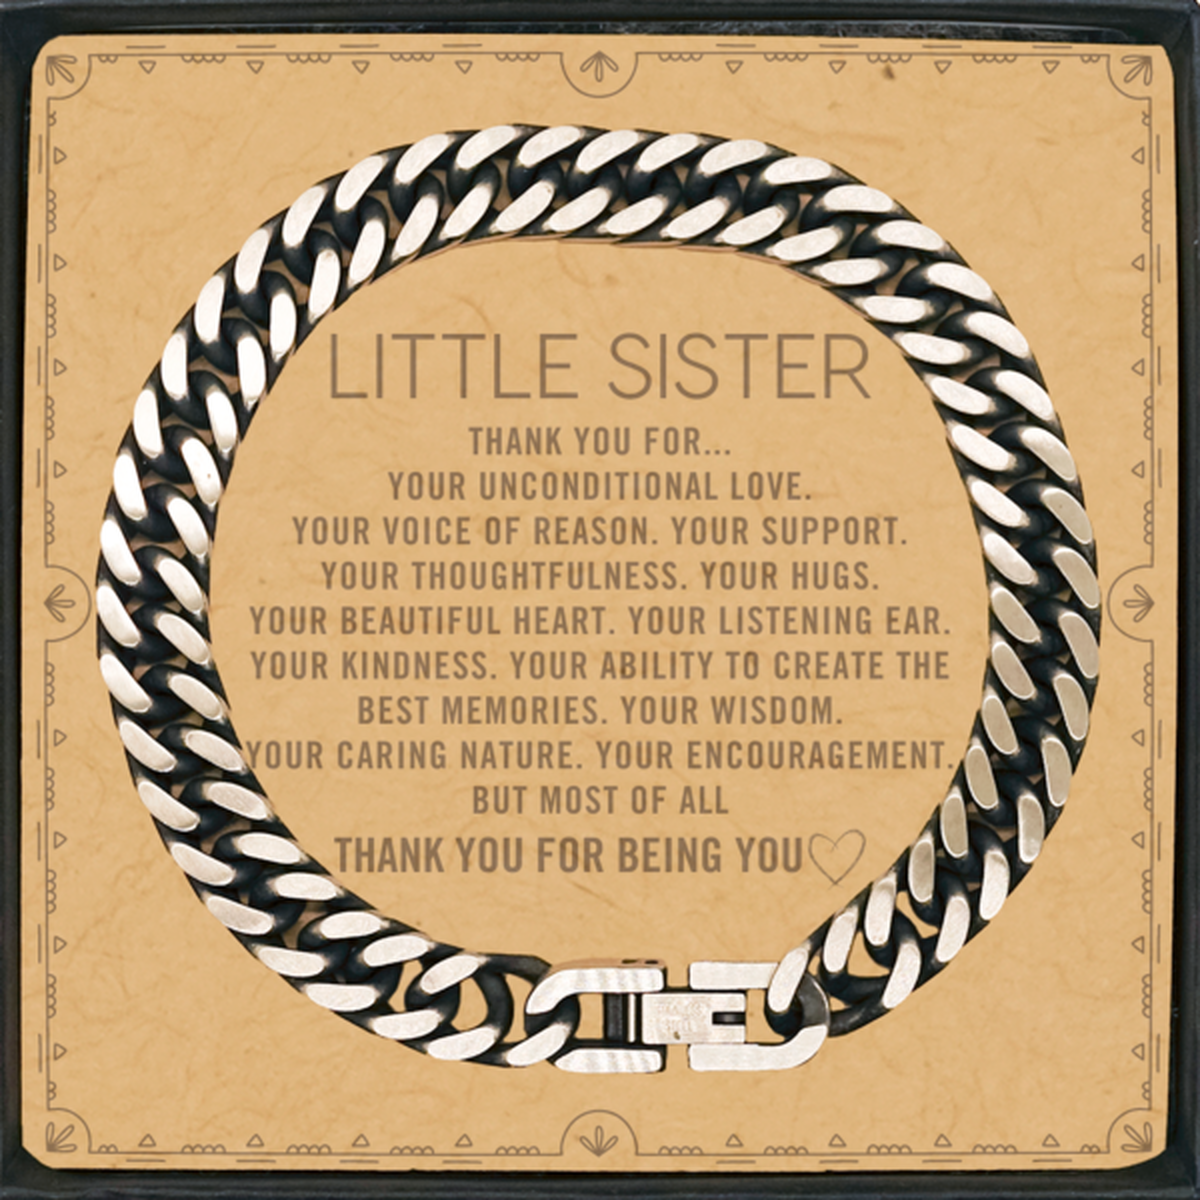 Little Sister Cuban Link Chain Bracelet Custom, Message Card Gifts For Little Sister Christmas Graduation Birthday Gifts for Men Women Little Sister Thank you for Your unconditional love